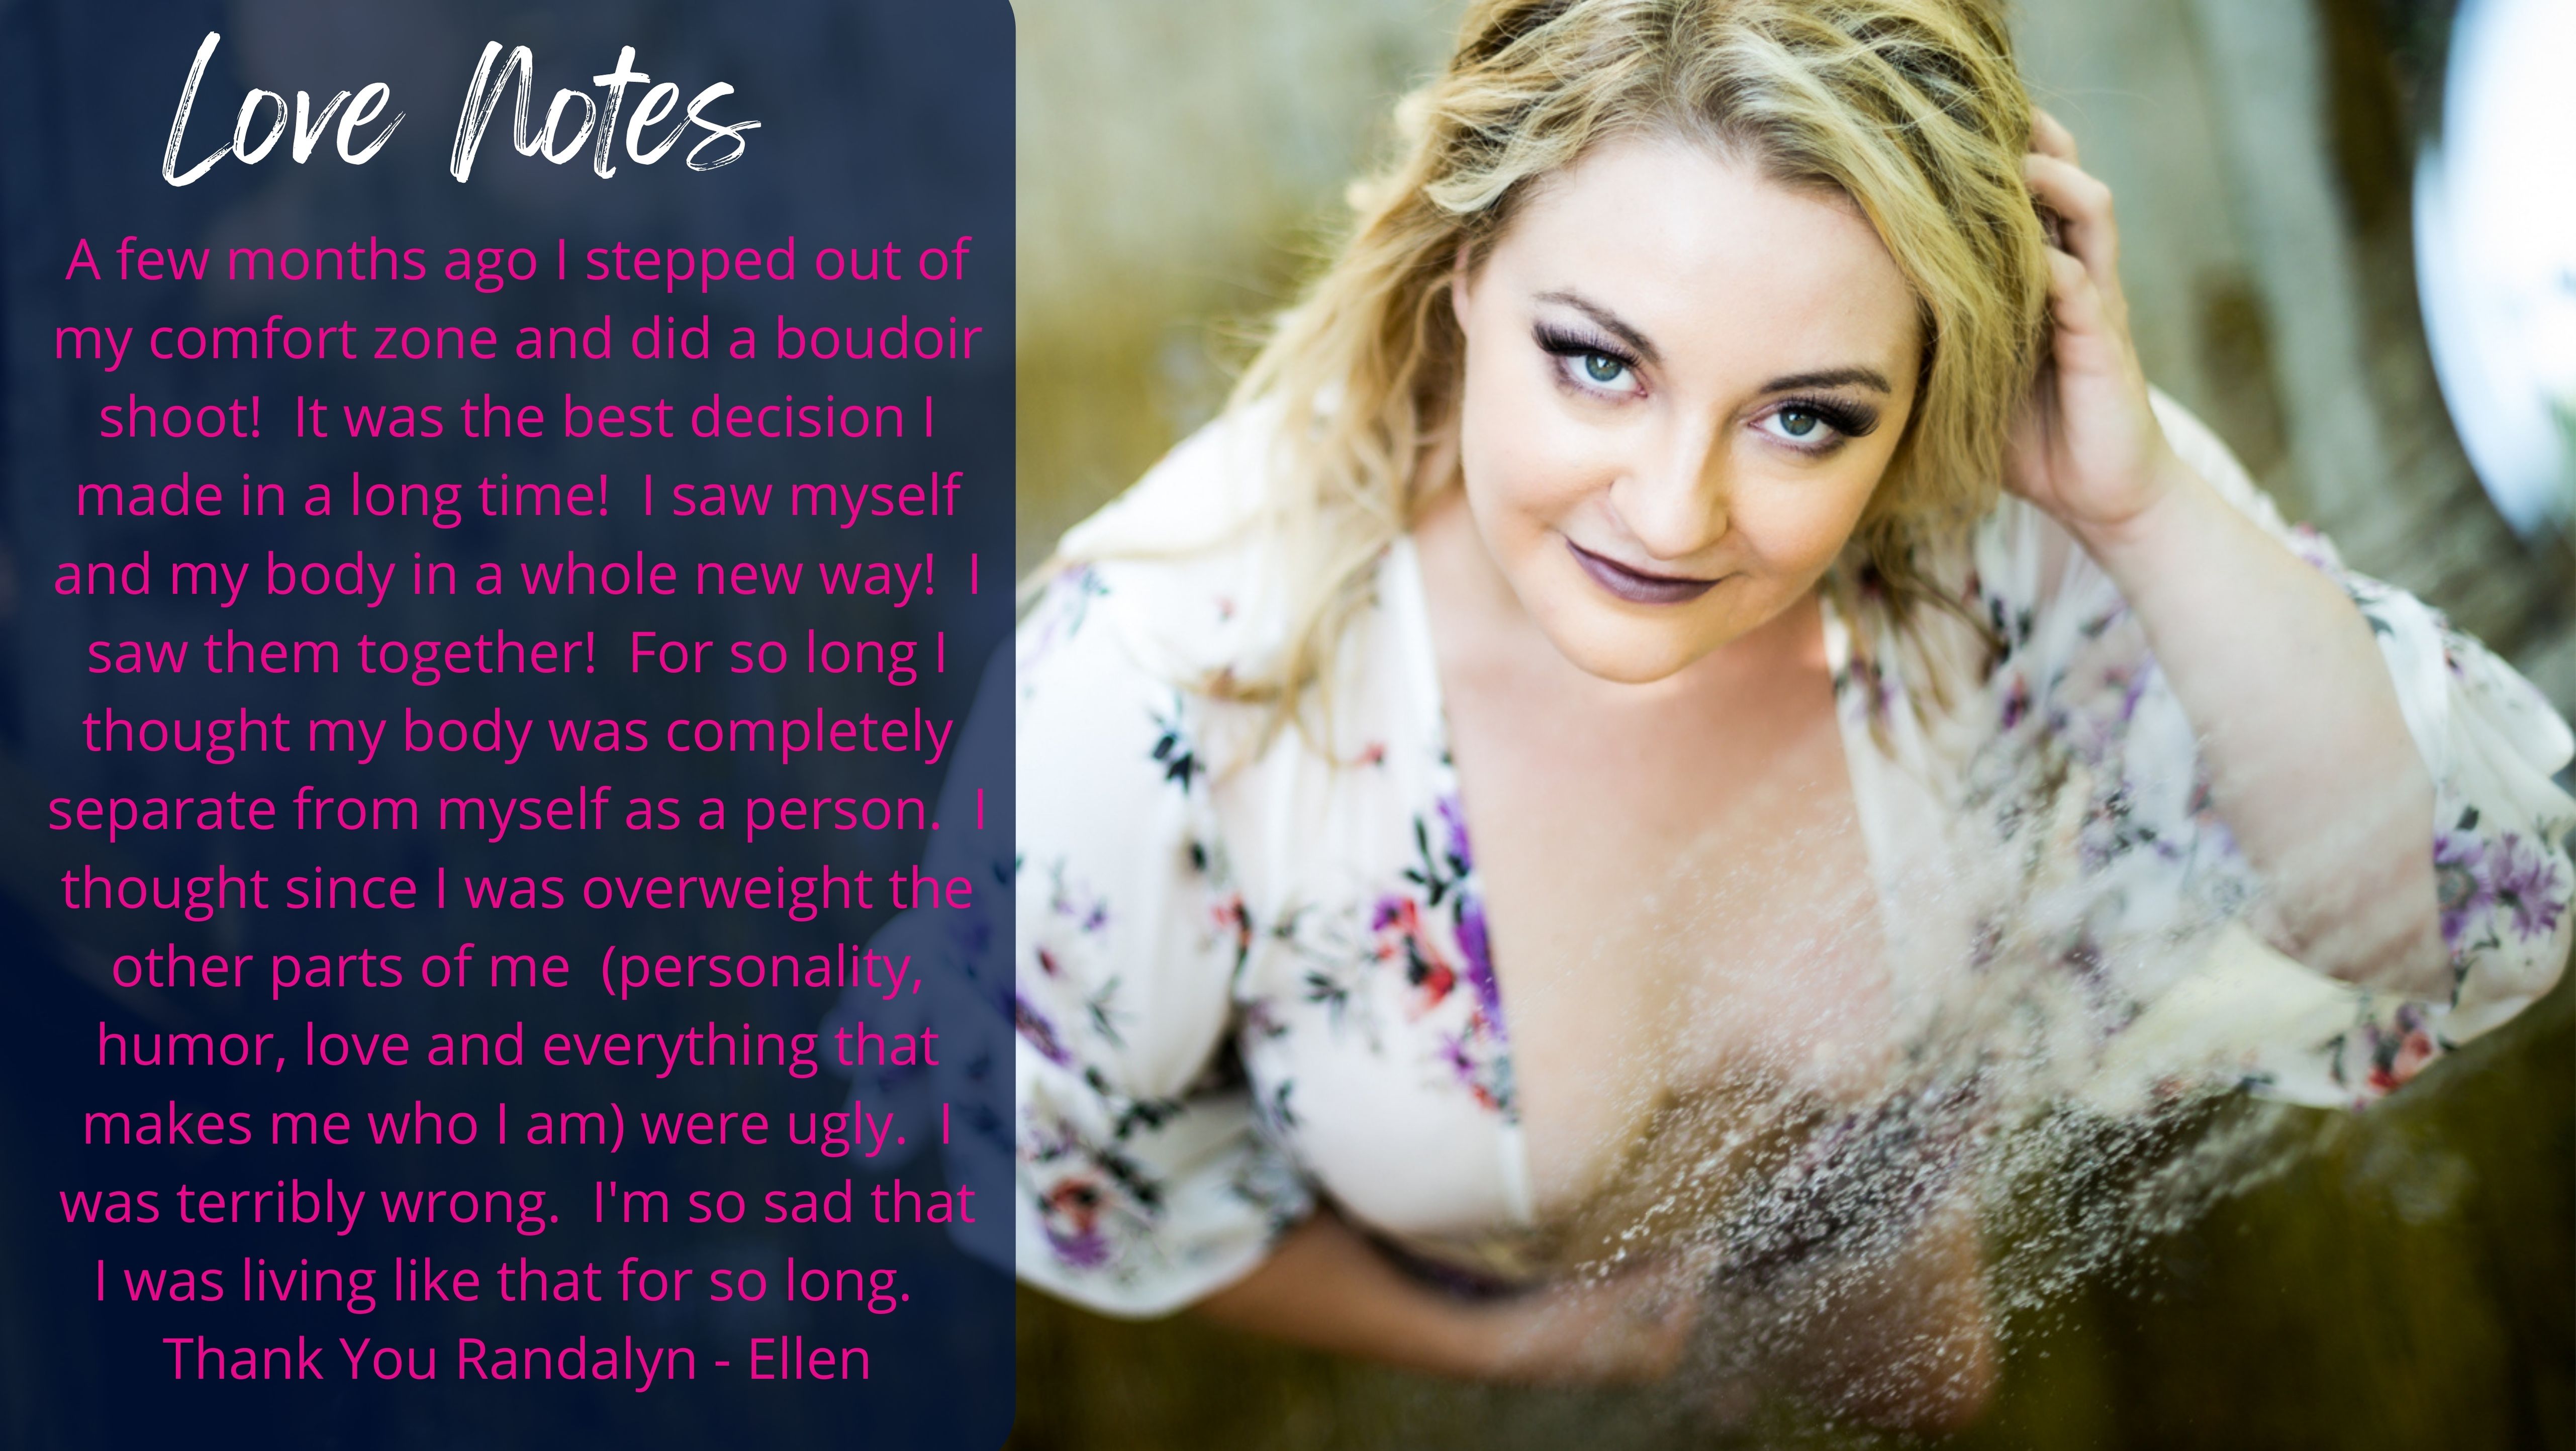 Client testimonial on the Siren Experience at Release Your Siren a boudoir studio located near St. Louis MO